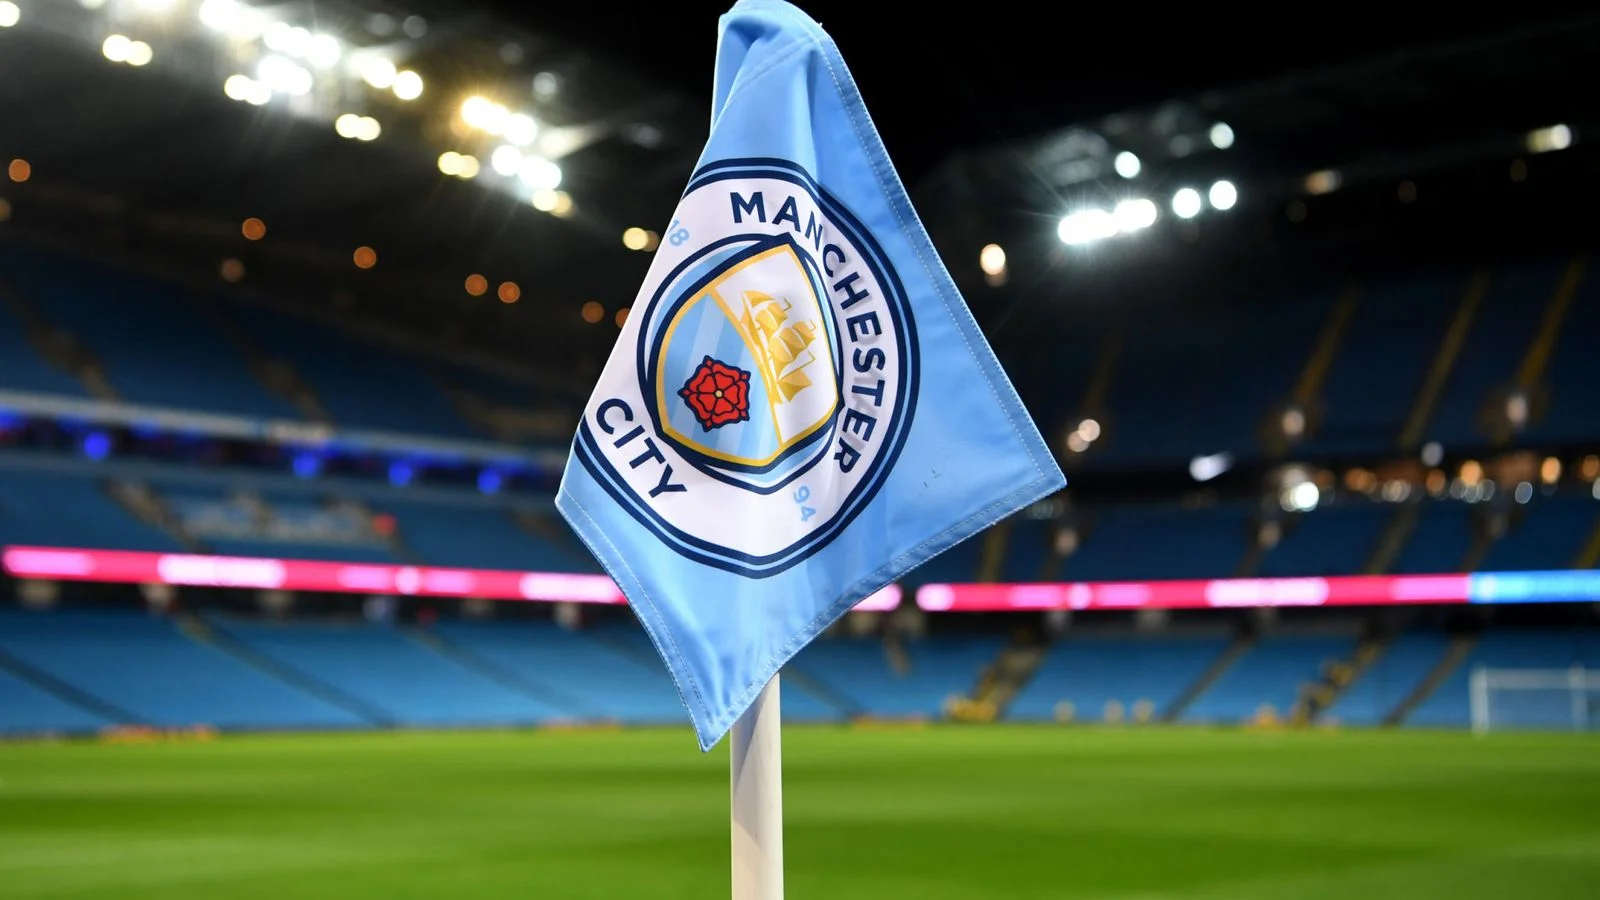 EPL: Man City confirms major injury blow ahead of West Ham, Man Utd matches